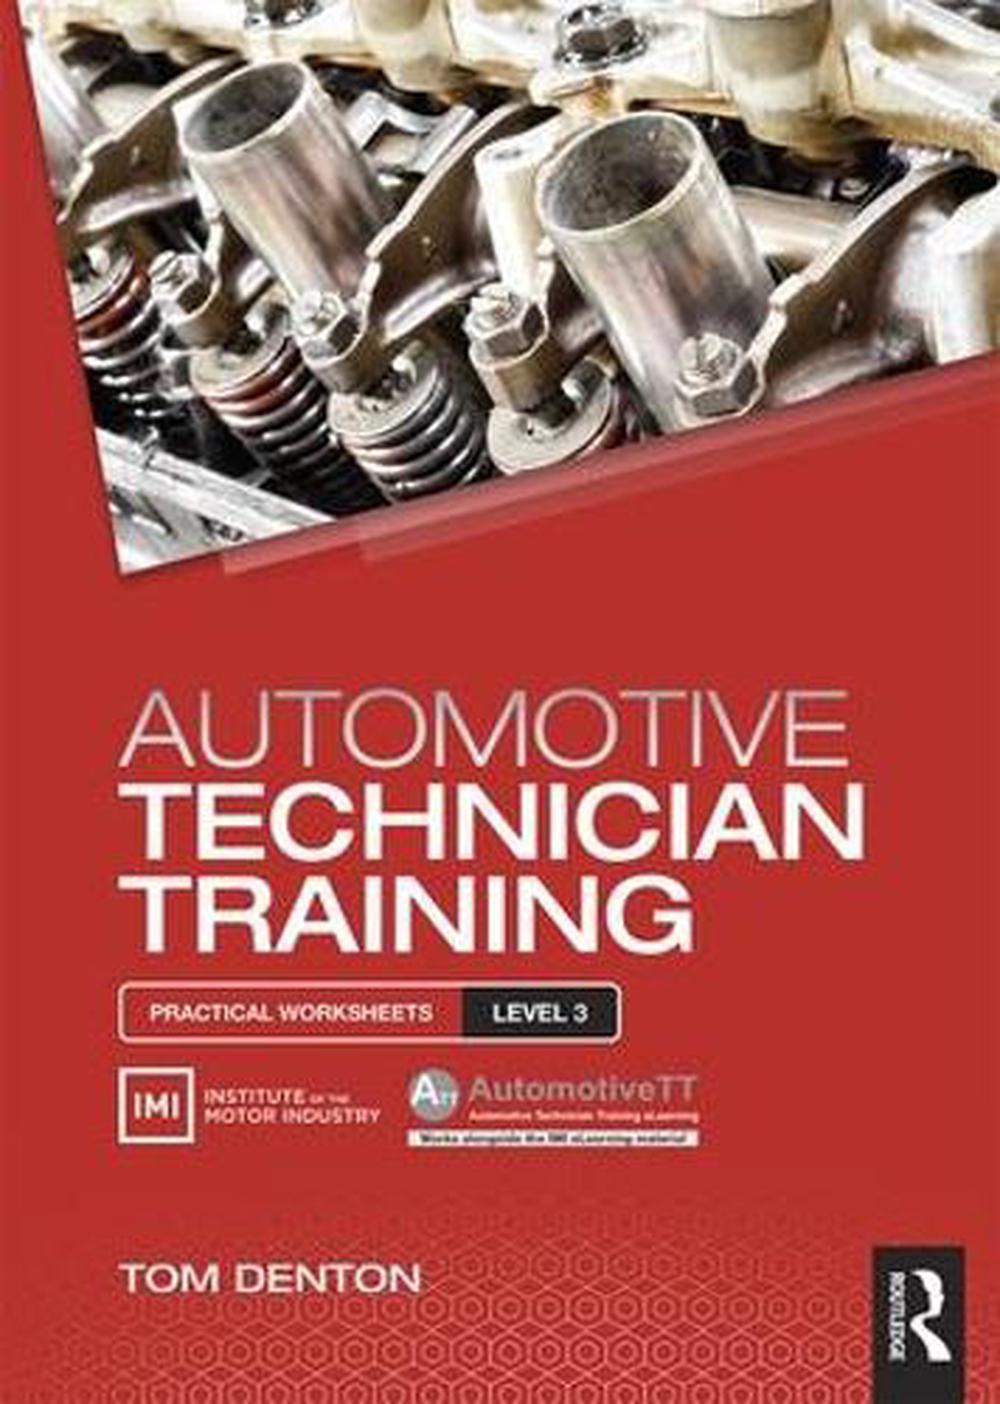 Automotive Technician Training Practical Worksheets Level 3 by Tom